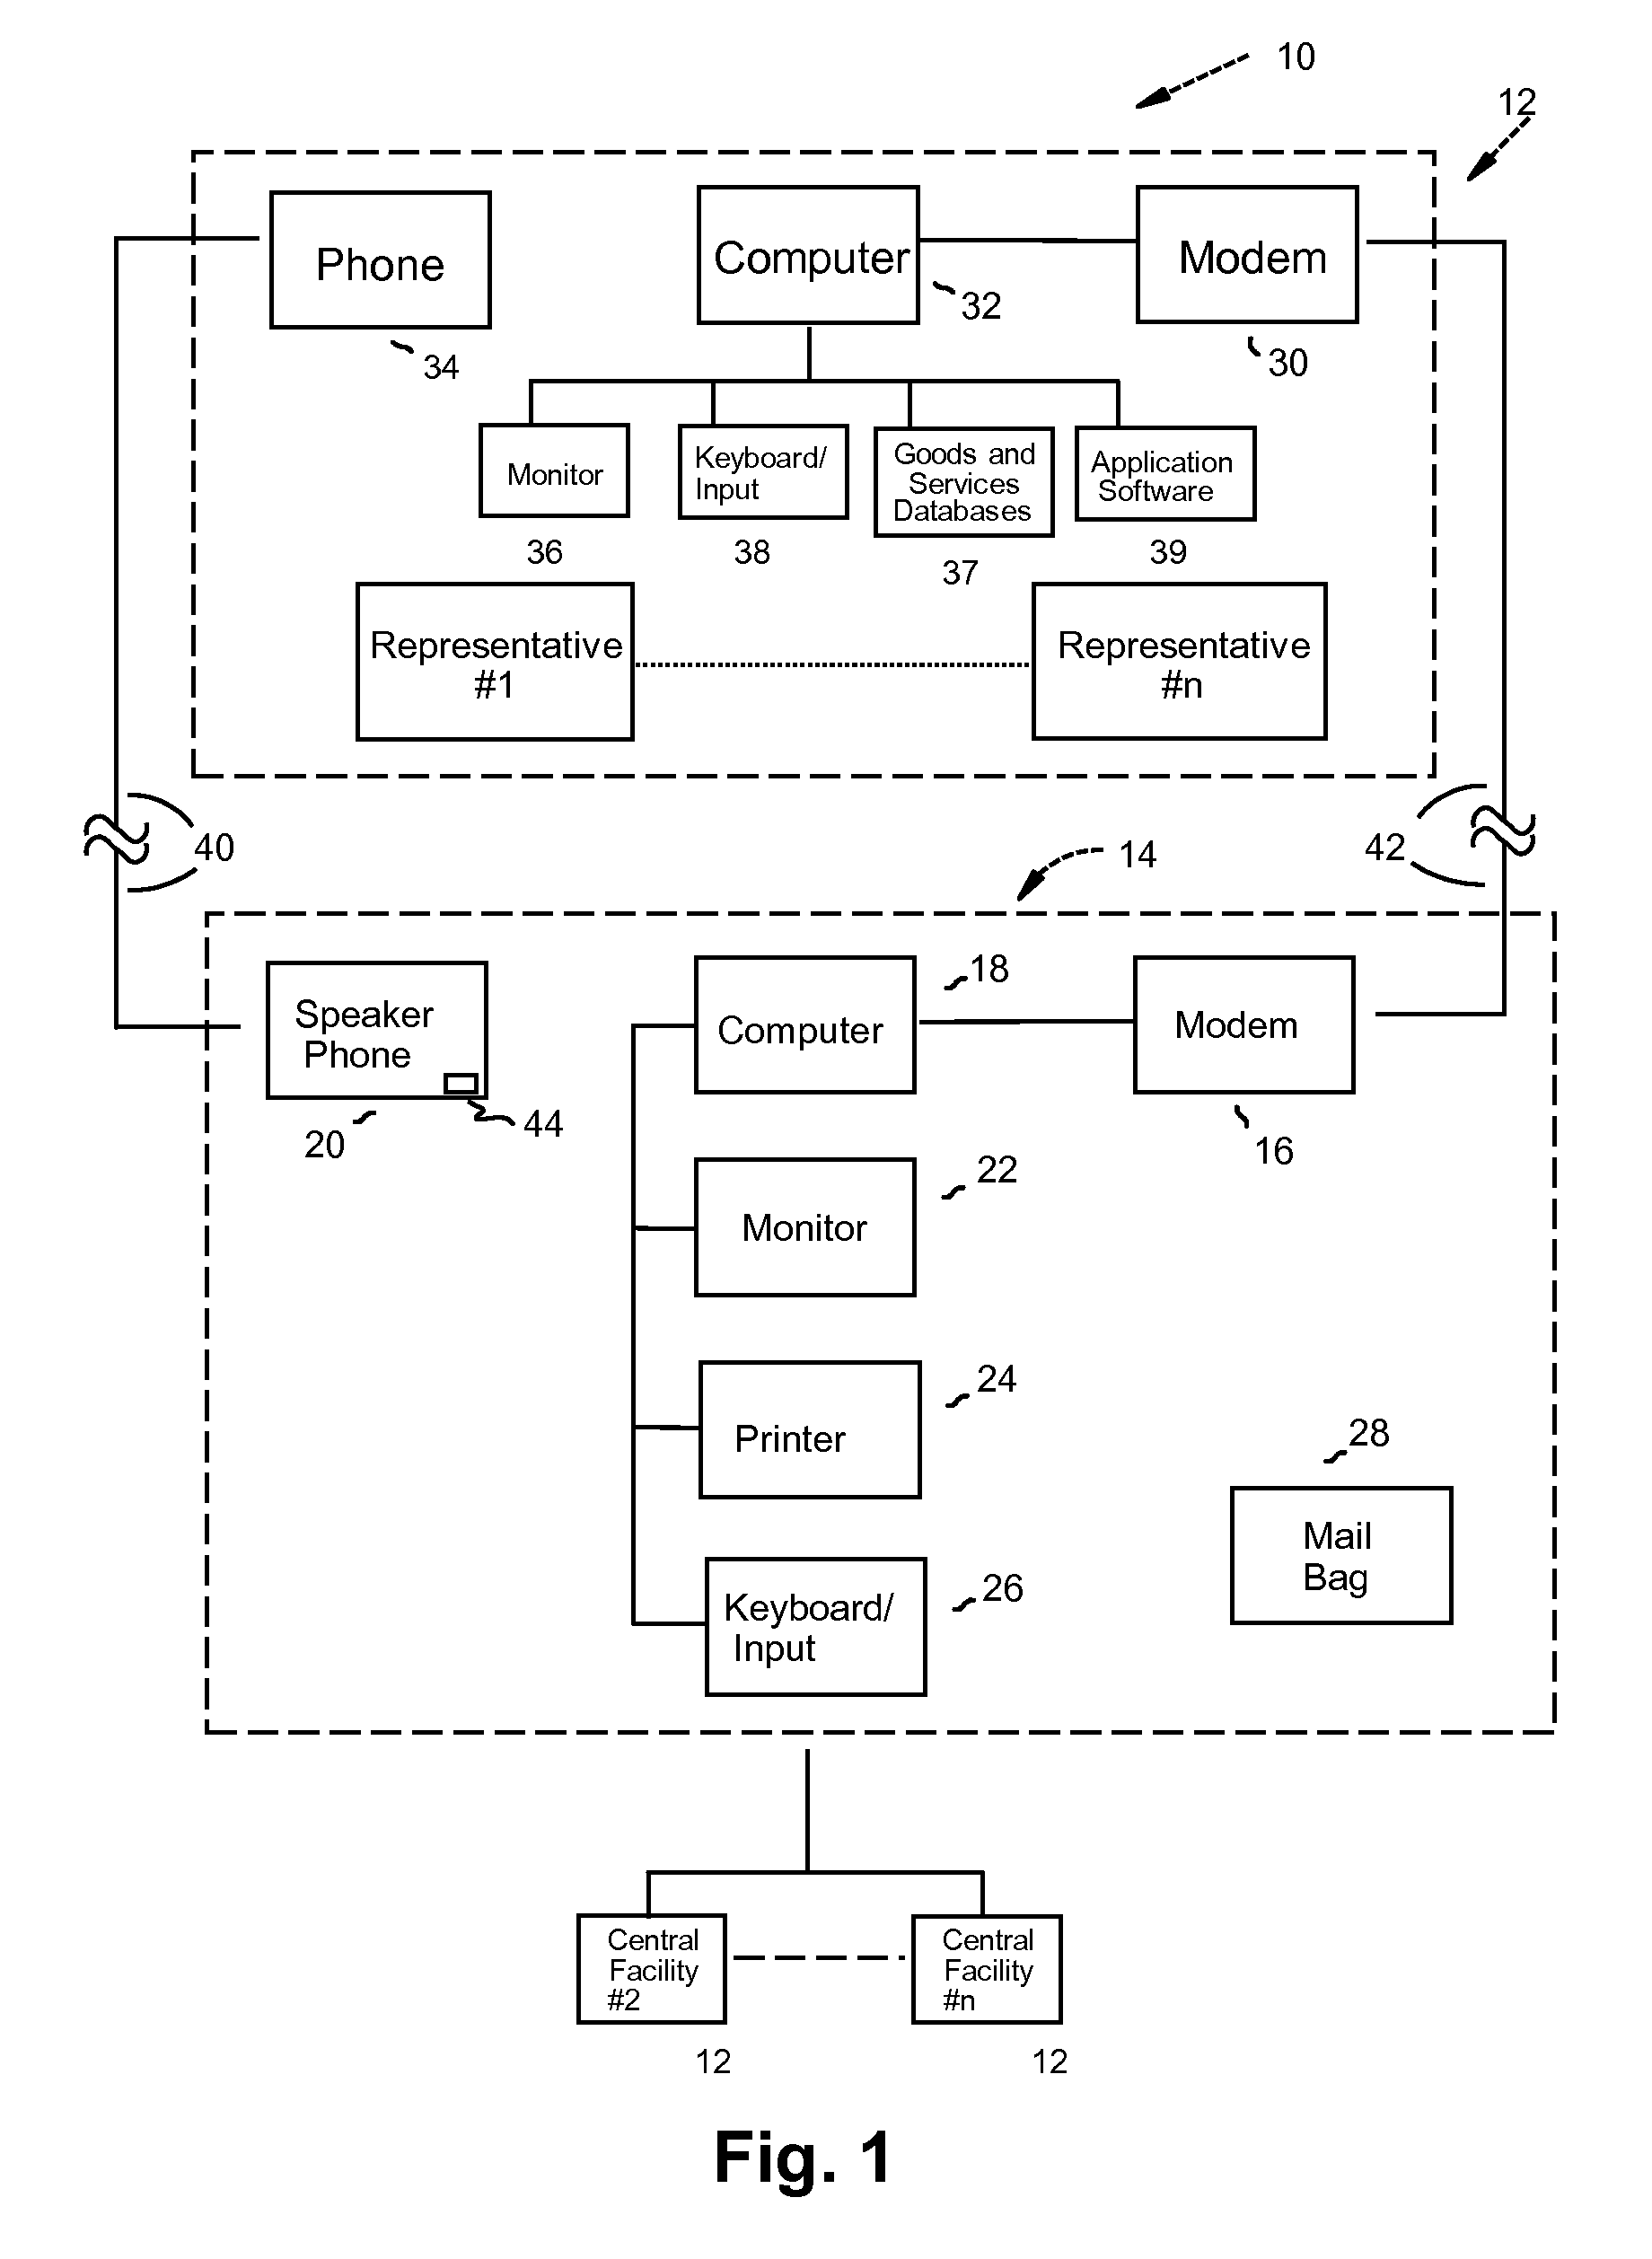 System for marketing goods and services utilizing computerized central and remote facilities